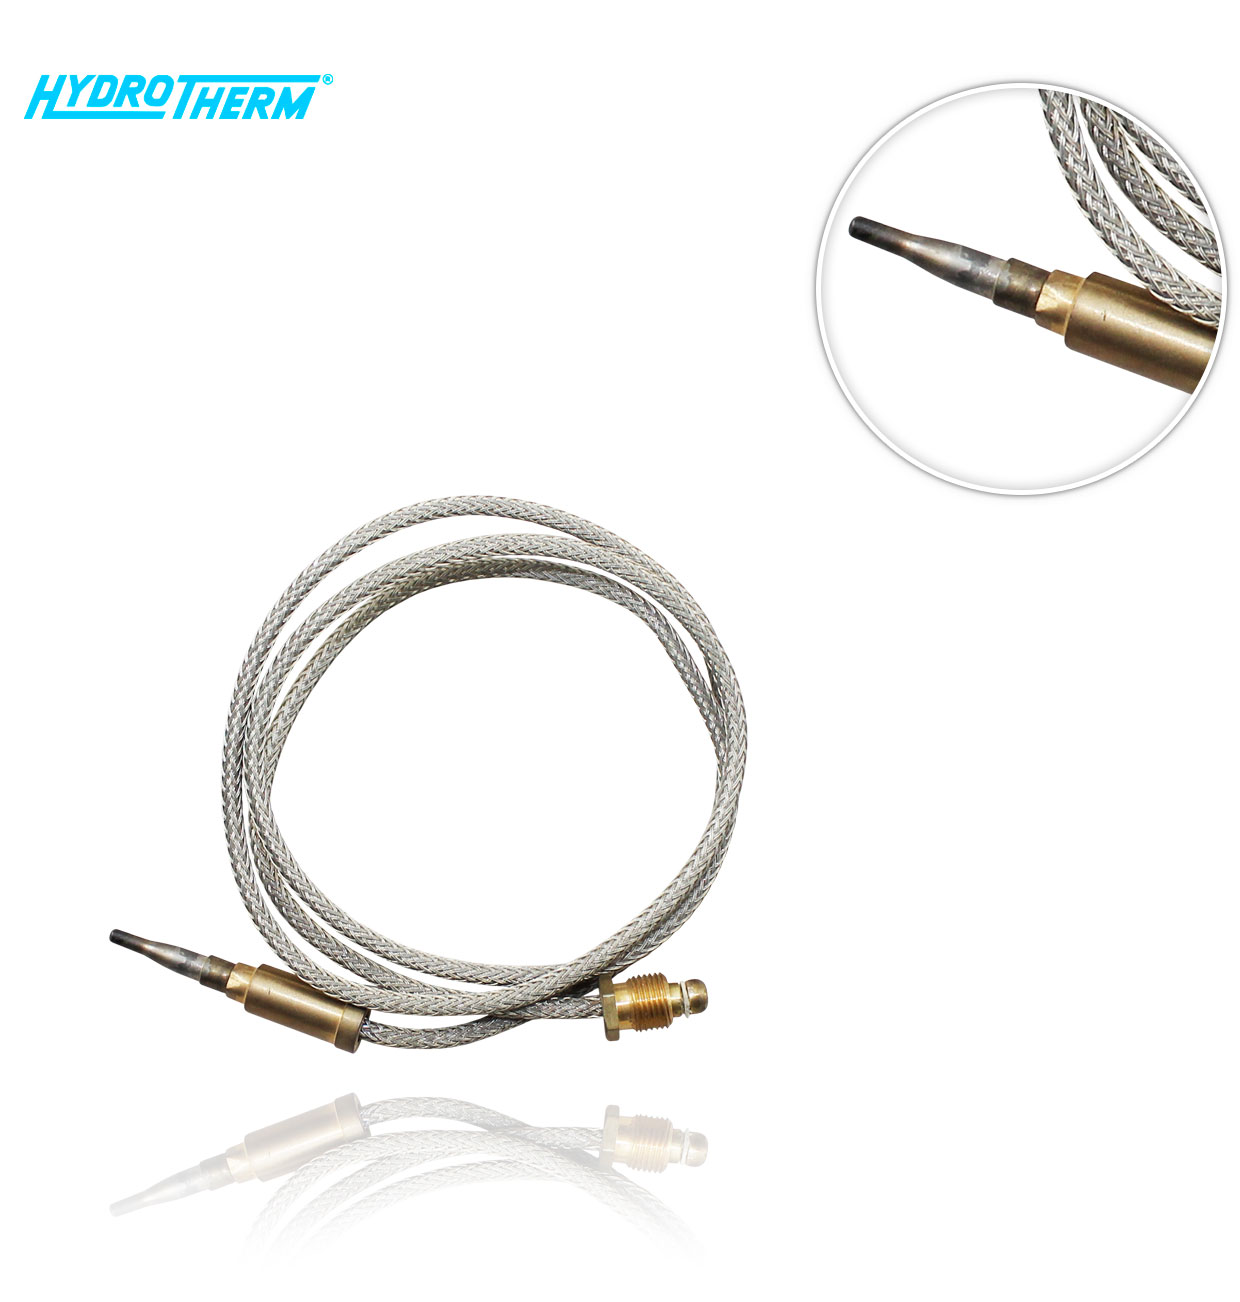 097070 ET 15-2 750mm HYDROTHERM THERMOCOUPLE